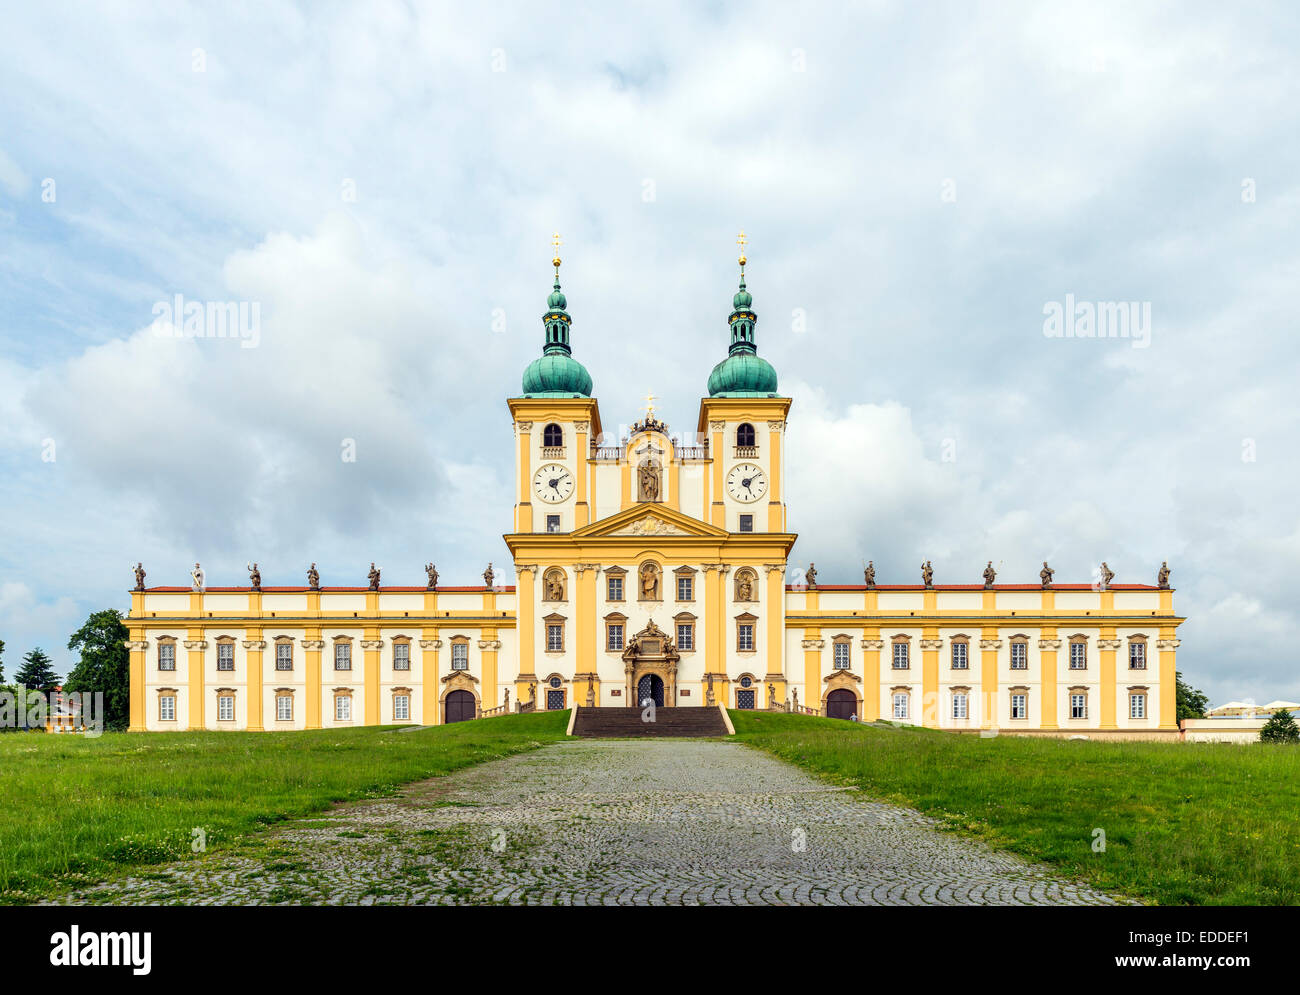 Premonstrate Monastery with the Basilica of the Annunciation, Svaty Kopecek or Holy Hill, Olomouc, Czech Republic Stock Photo